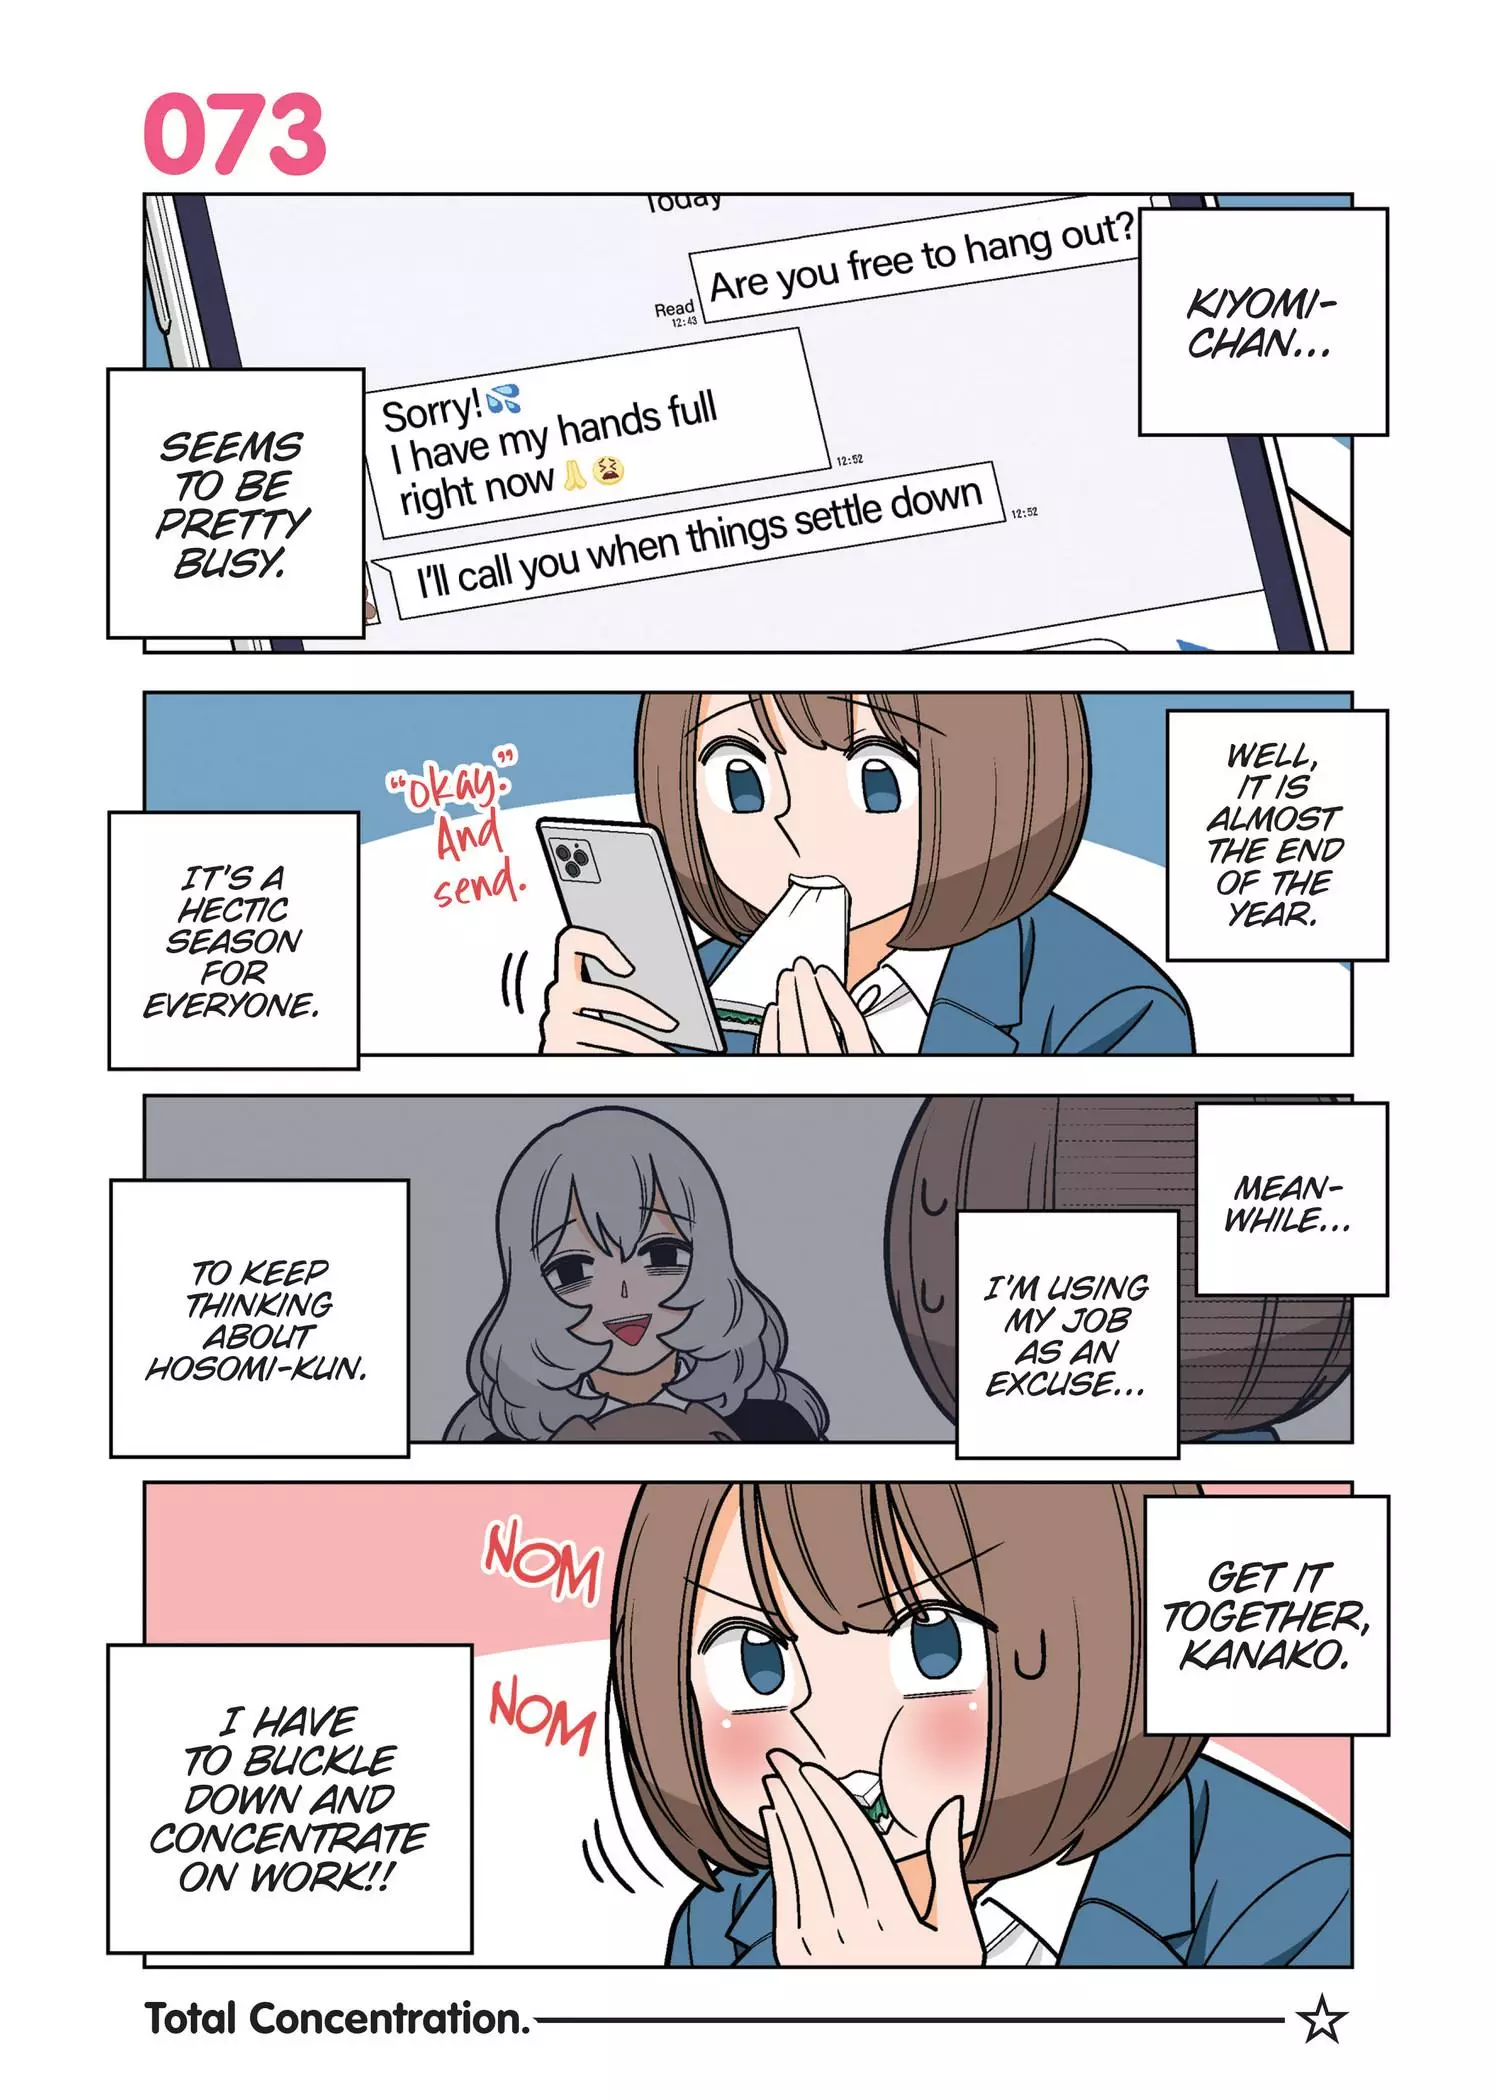 Kanako's Life As An Assassin - 73 page 2-7440ddc6